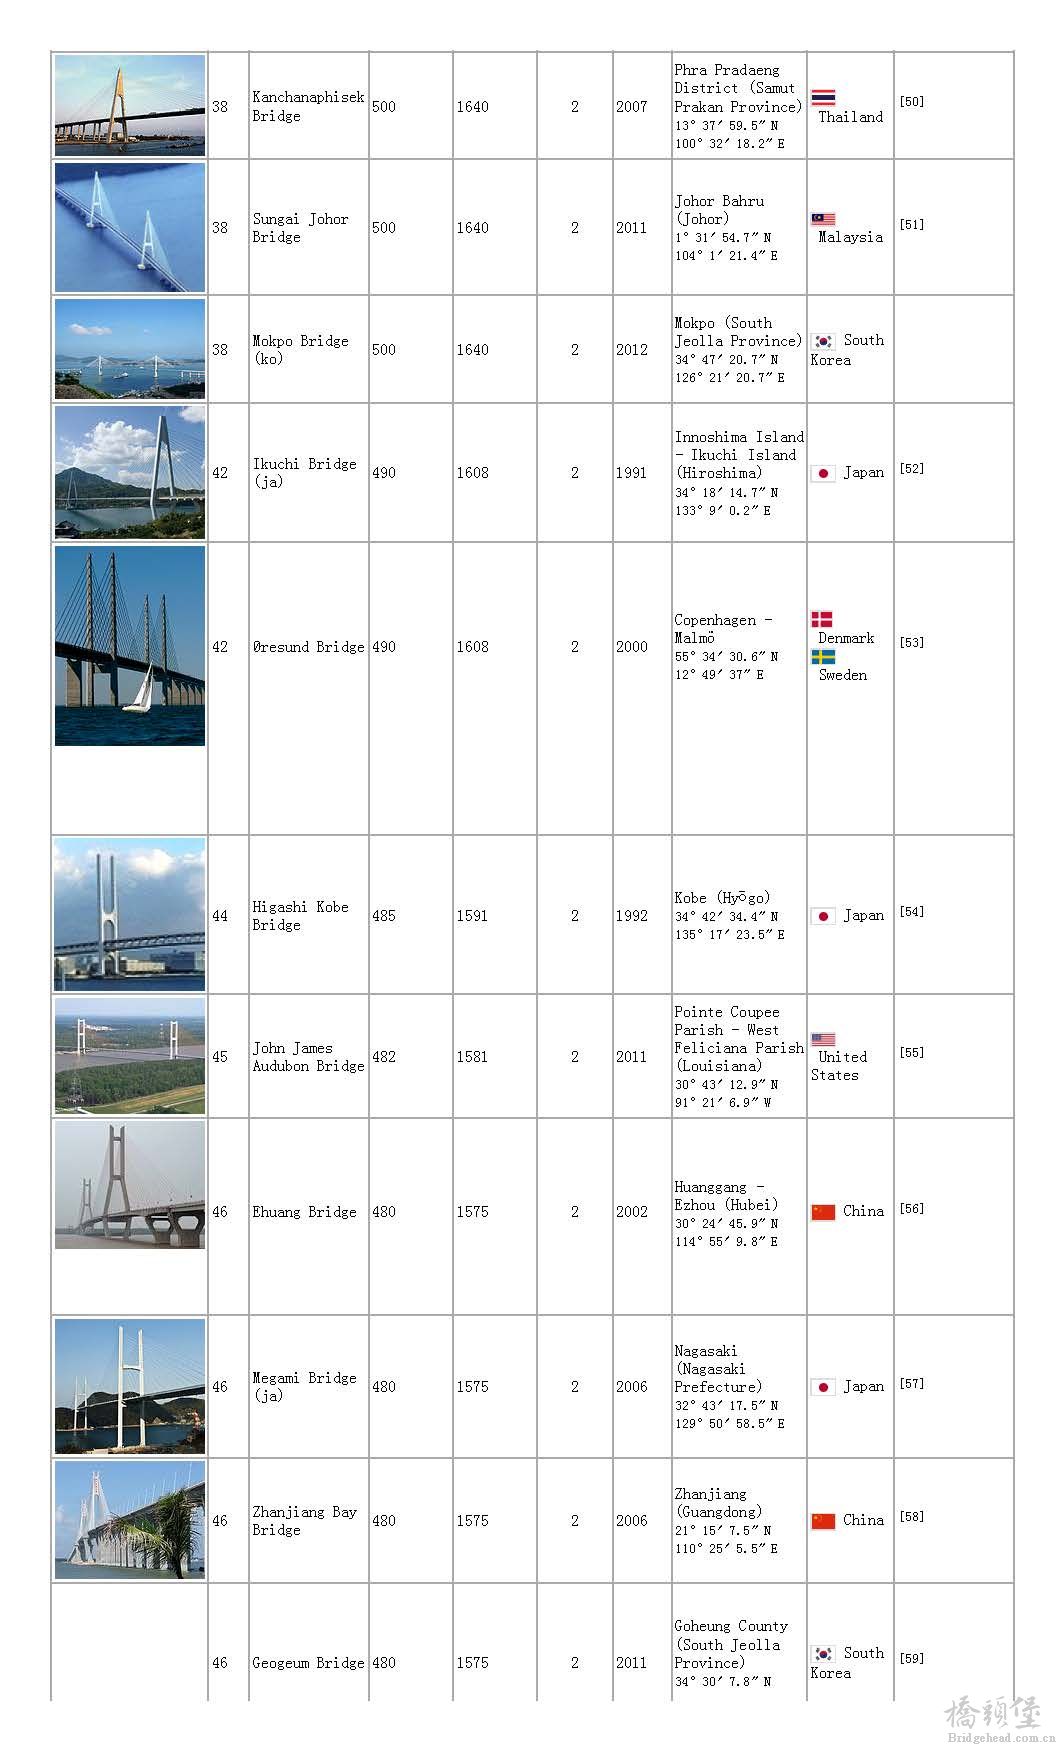 List of longest cable-stayed bridge spans - Wikipedia, the free encyclopedia_页面_05.jpg